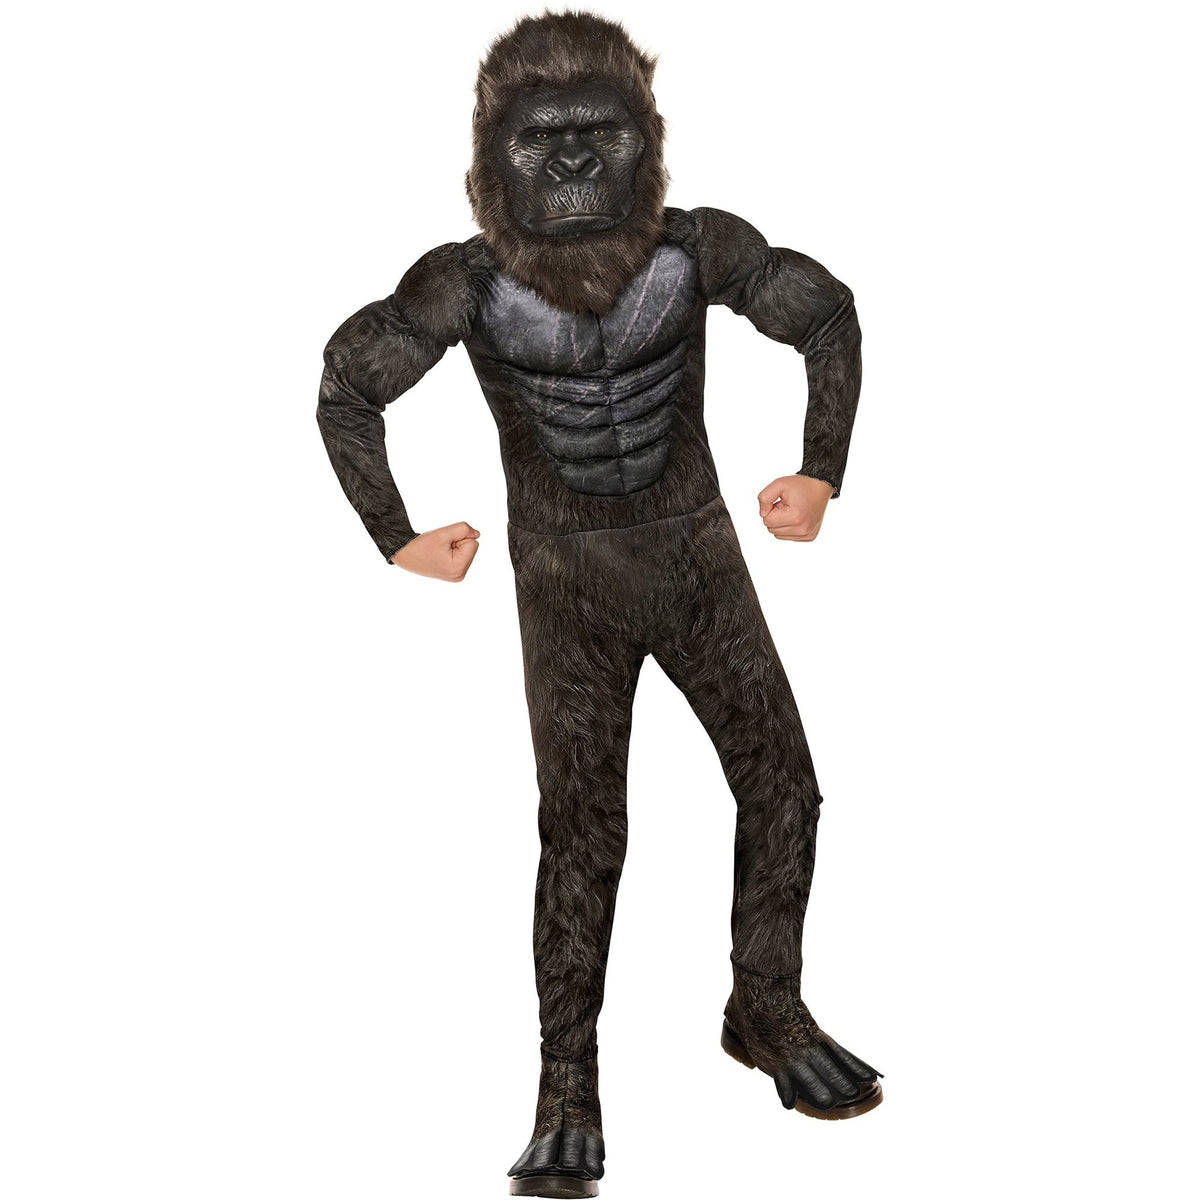 IN SPIRIT DESIGNS Costumes Kong Costume for Kids, Godzilla x Kong: The New Empire, Ape Jumpsuit